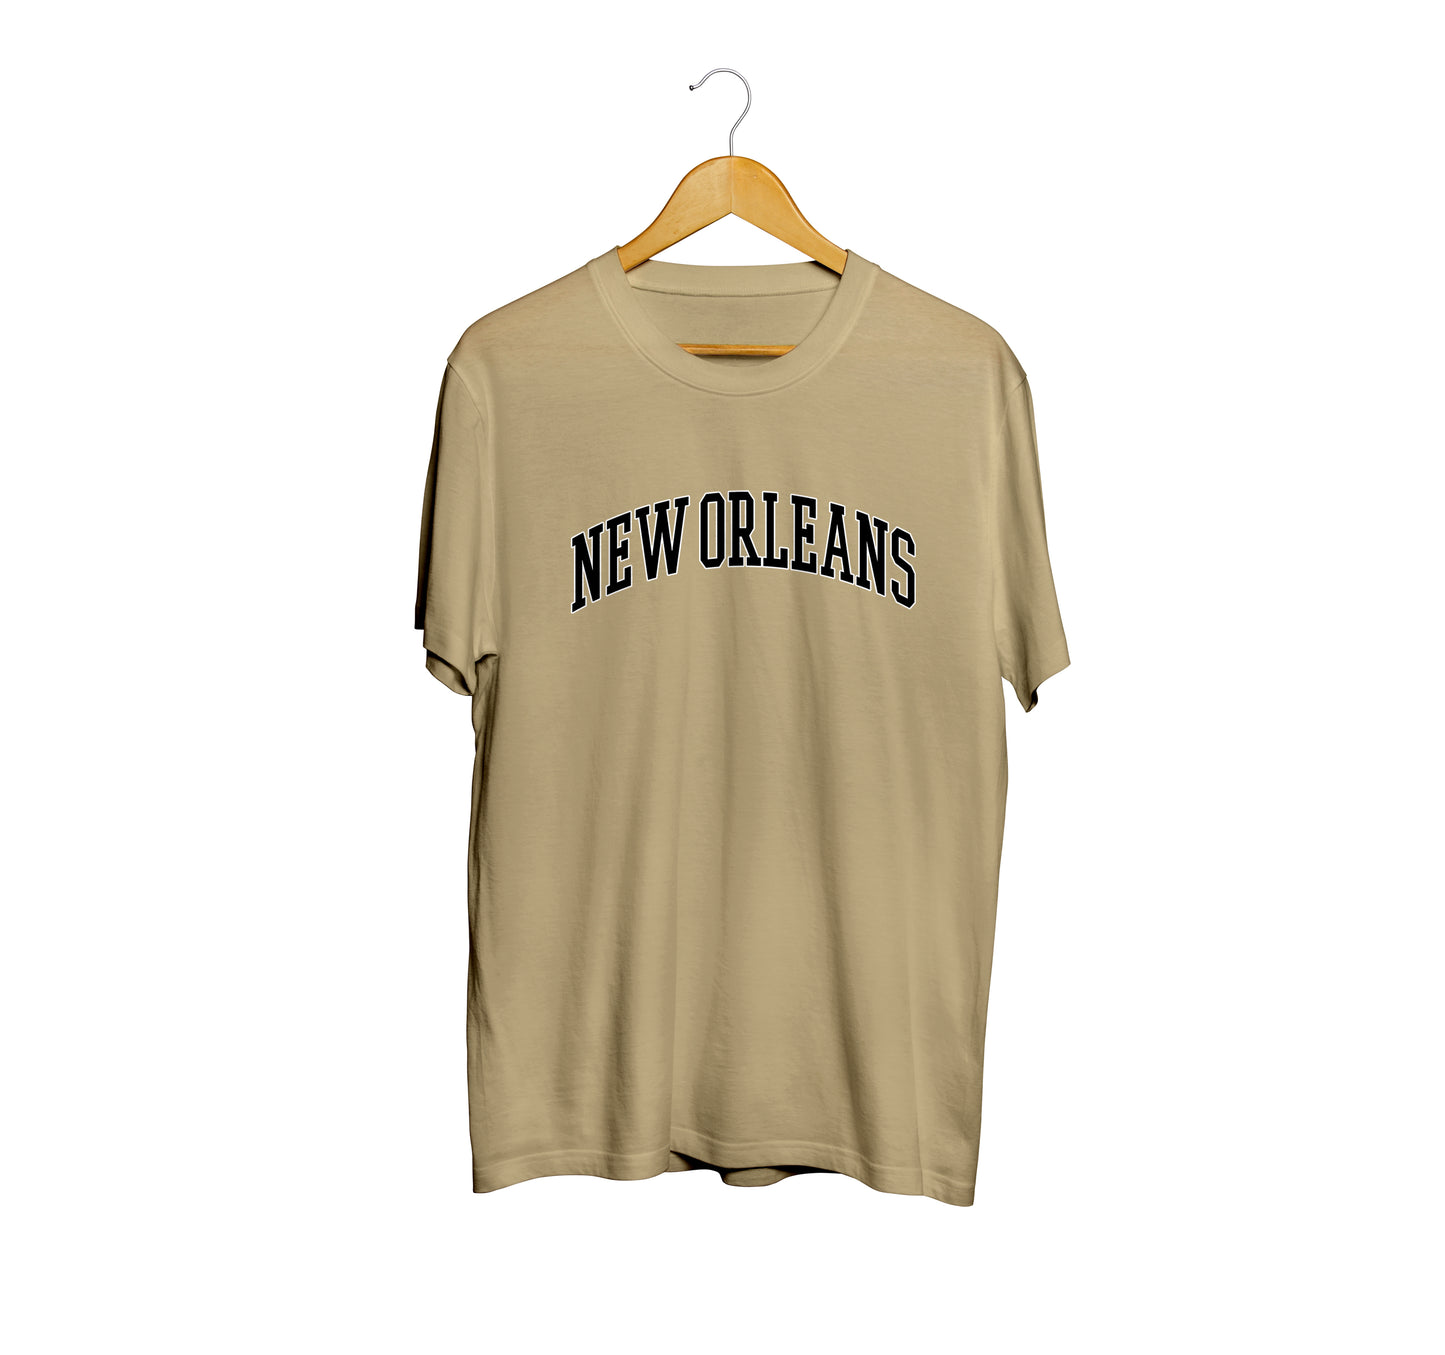 New Orleans Gold Tee